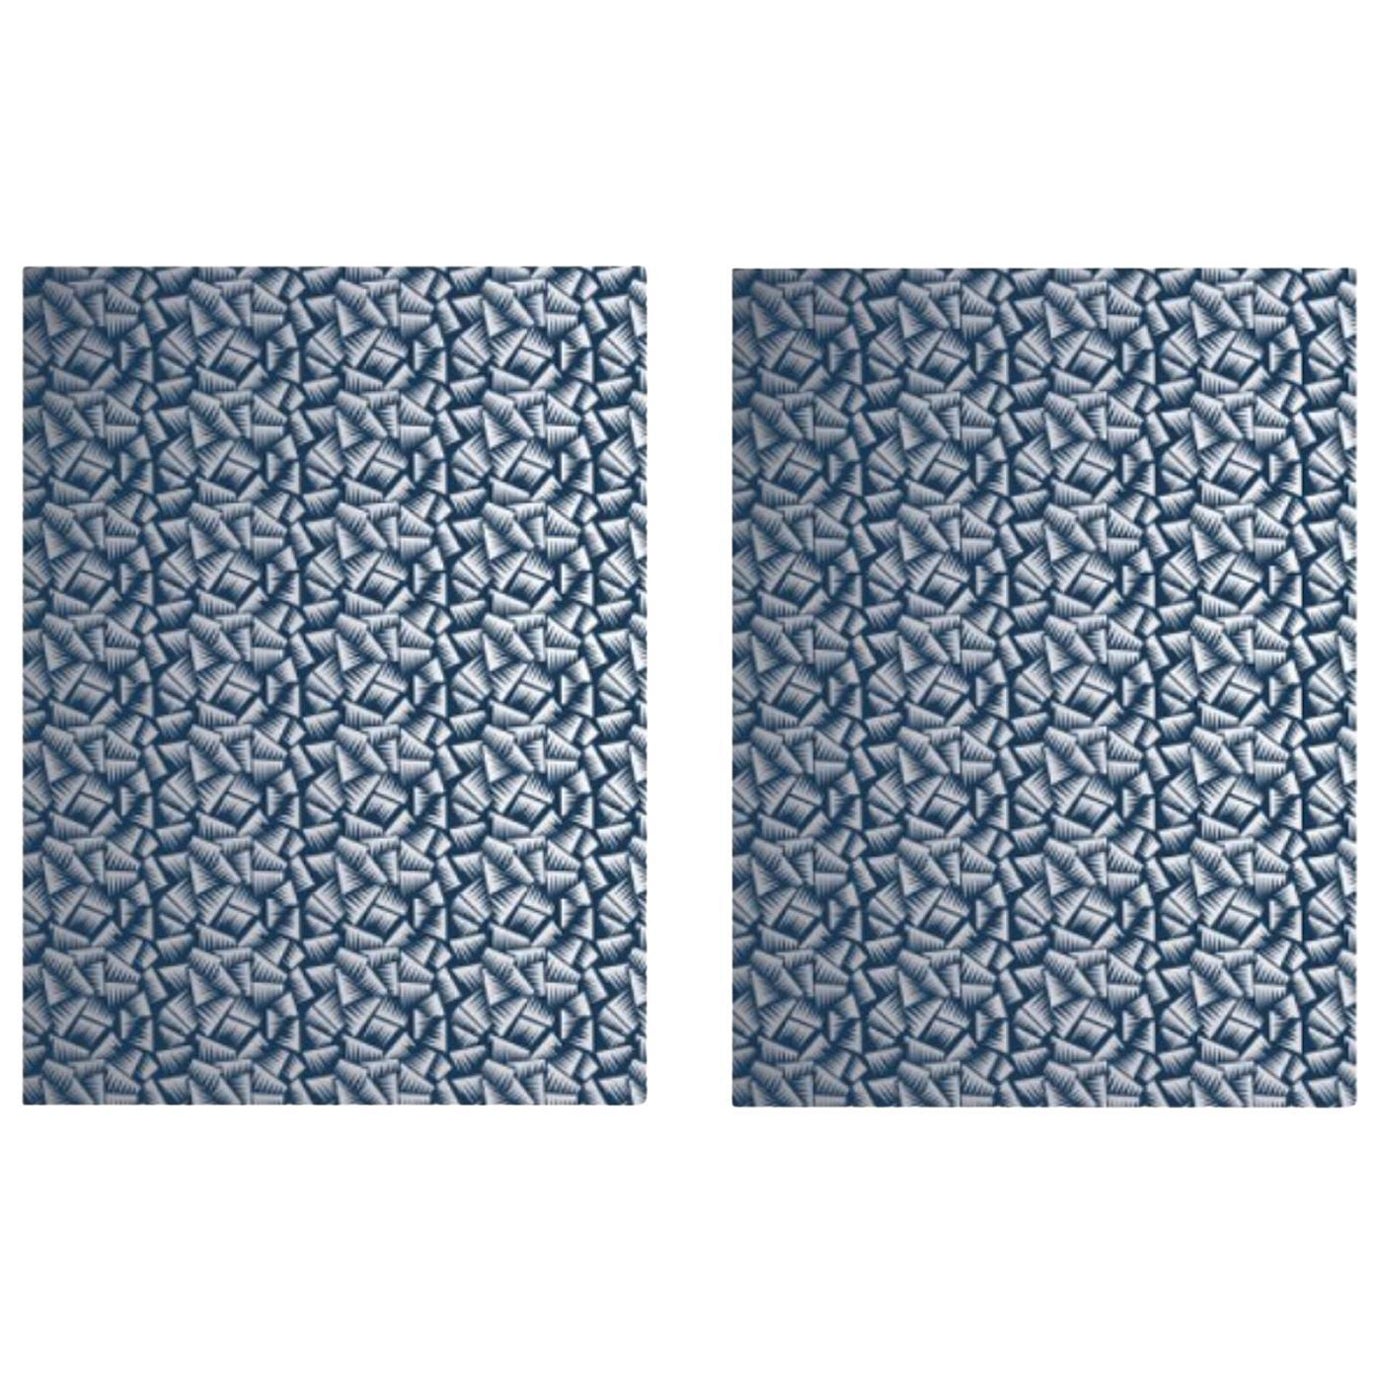 Set of 2 Wallpapers "JER", Jacques Emile Rulhmann